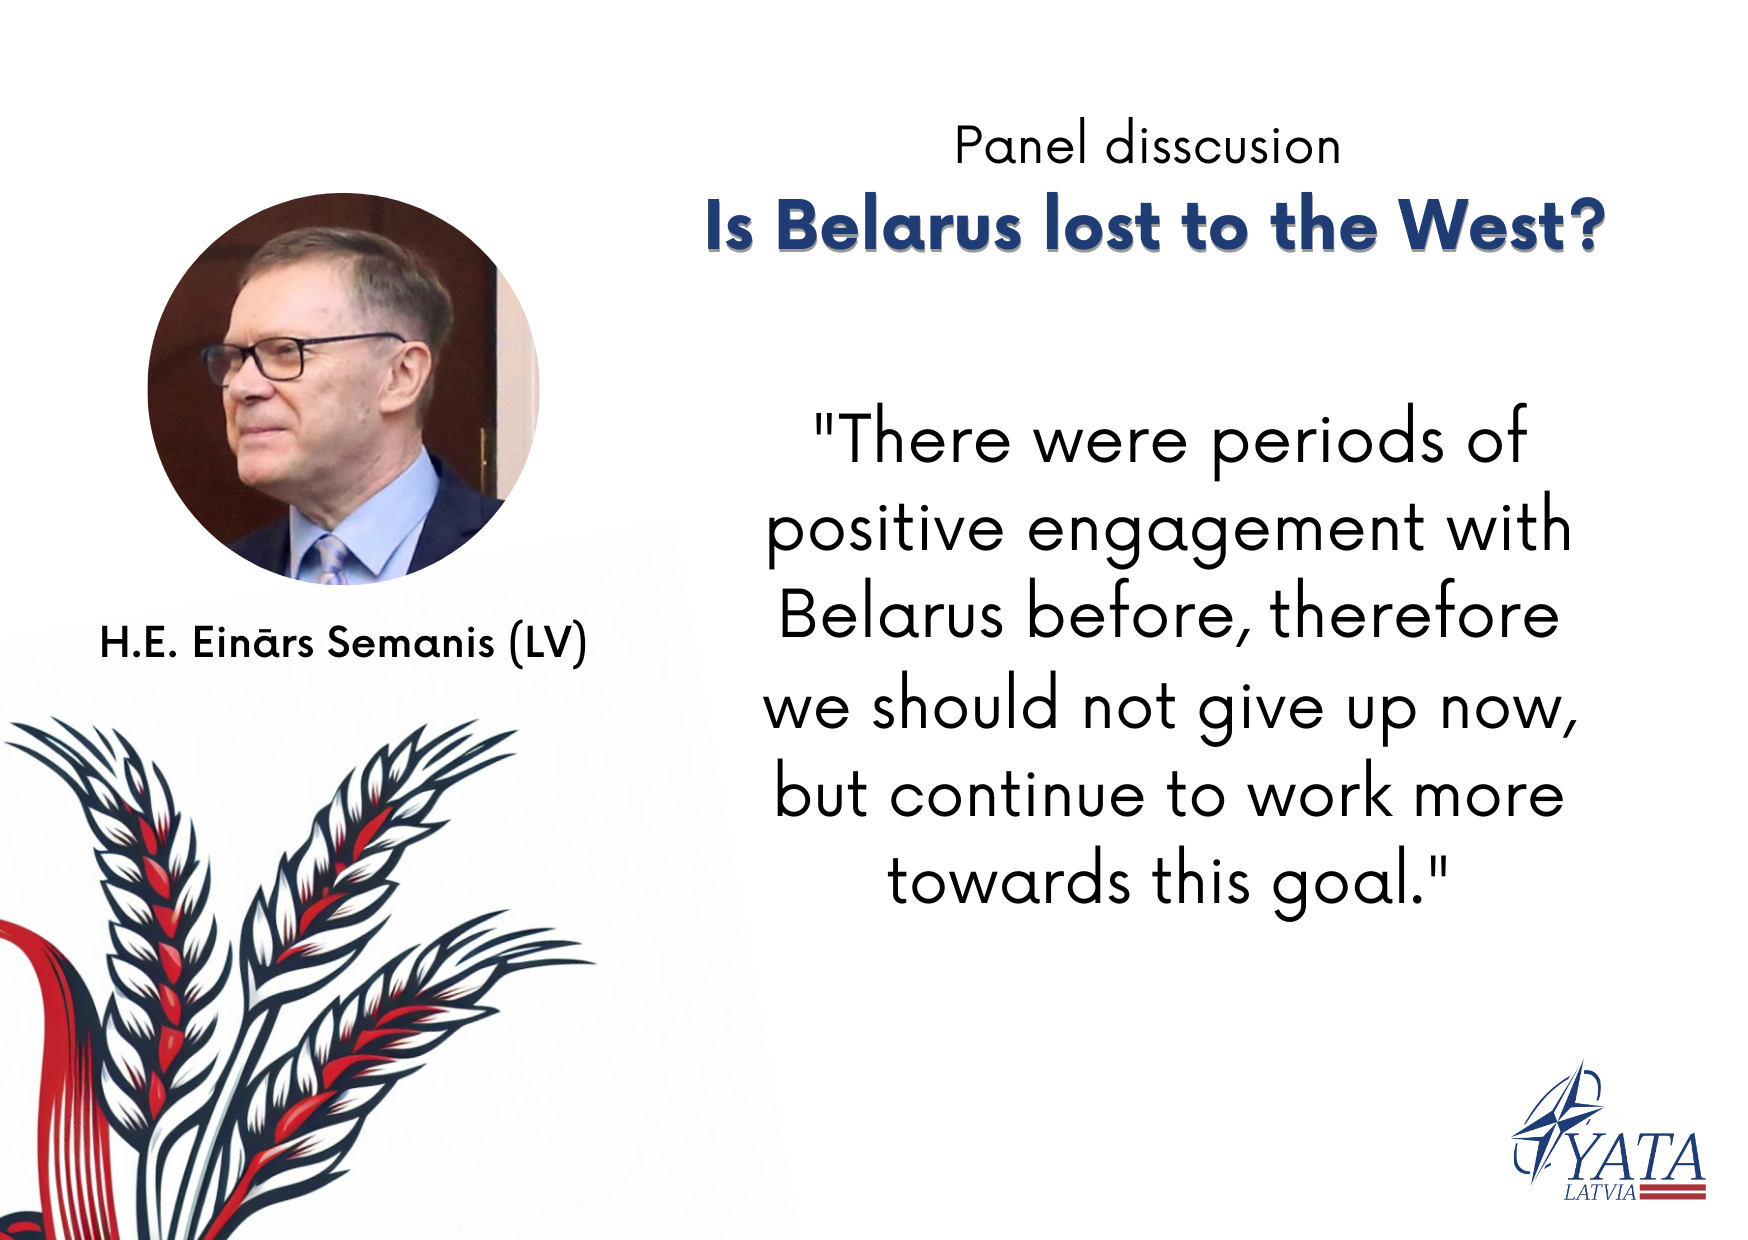 A look back at the panel discussion “Is Belarus lost to the West?”